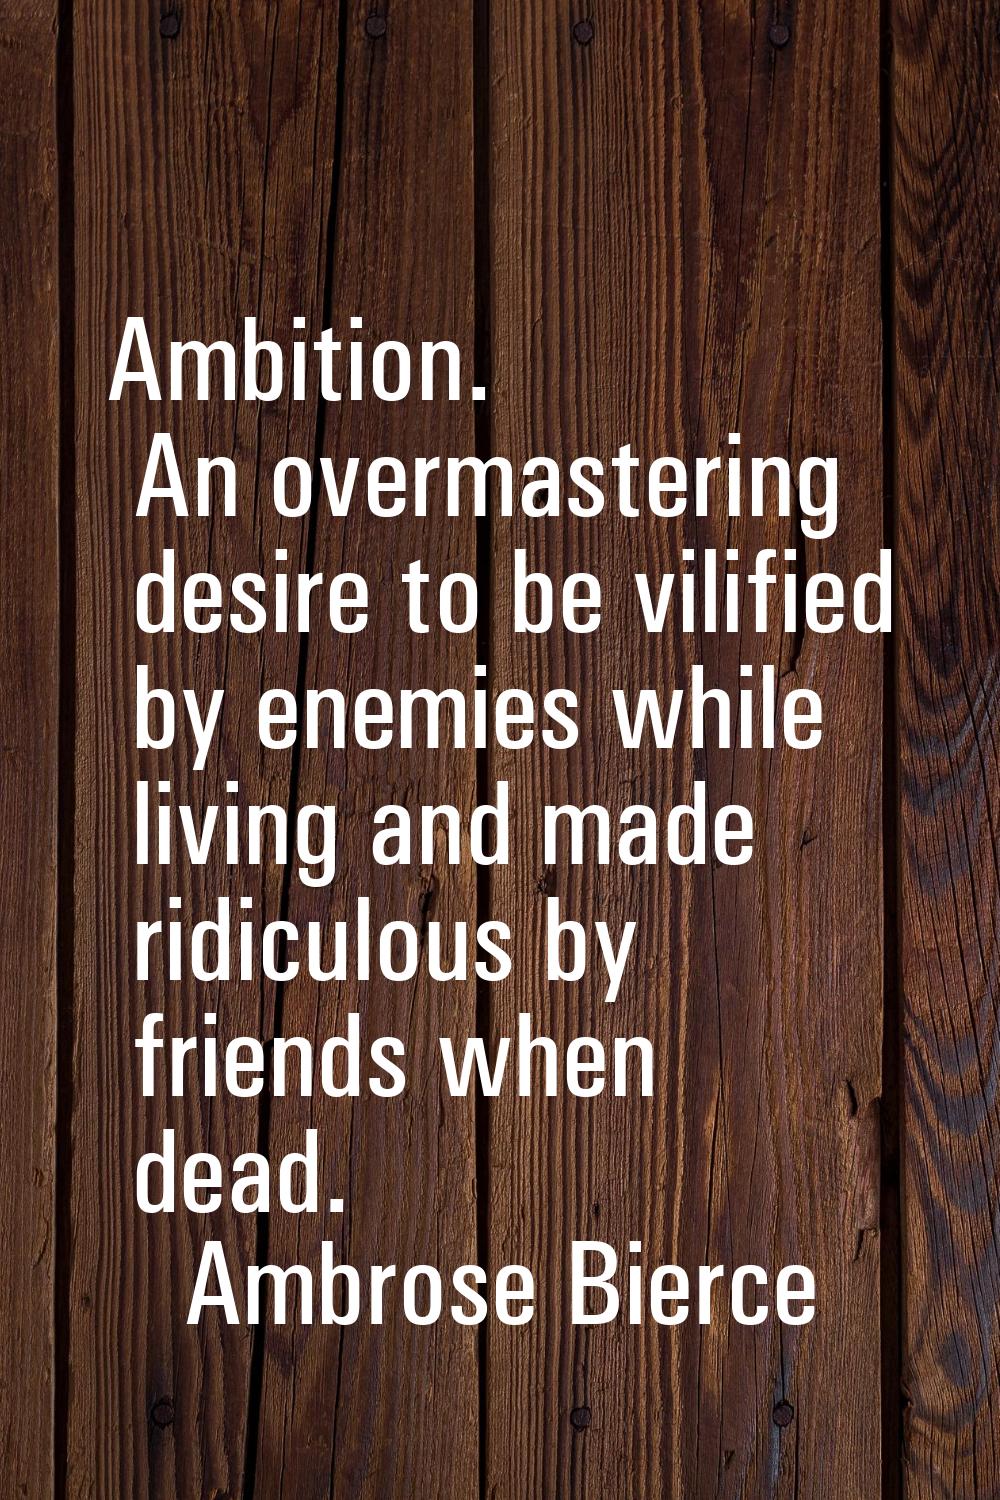 Ambition. An overmastering desire to be vilified by enemies while living and made ridiculous by fri